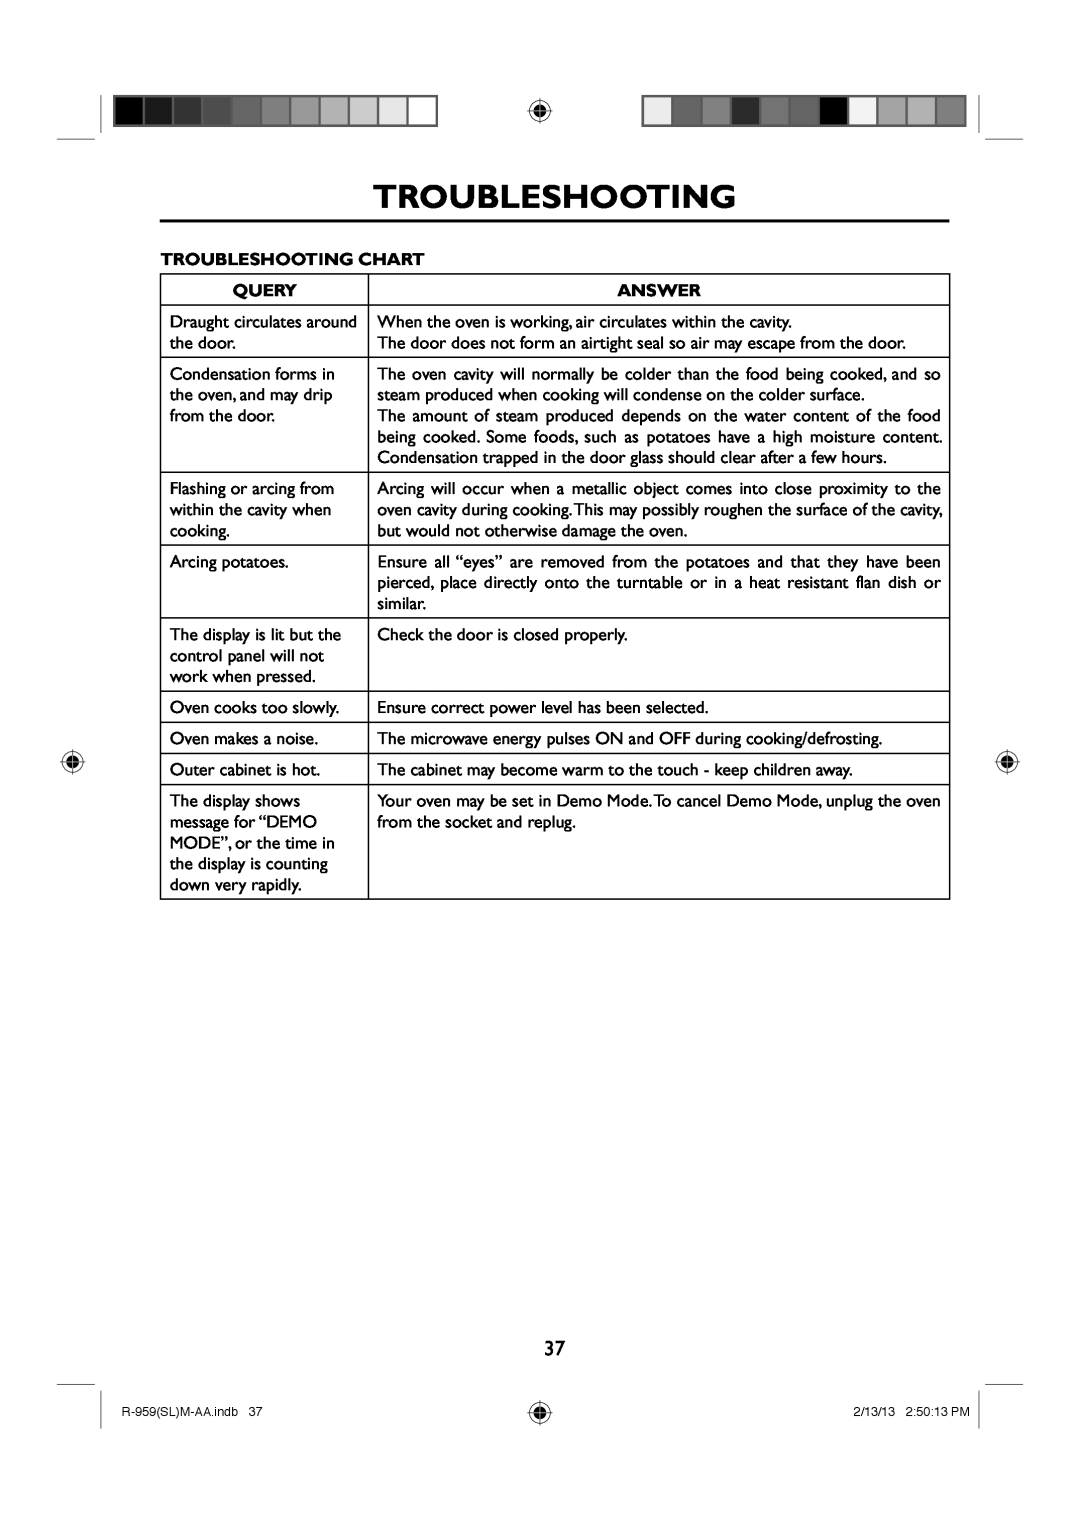 Sharp R-959(SL)M-AA manual Troubleshooting Chart, Query, Answer 